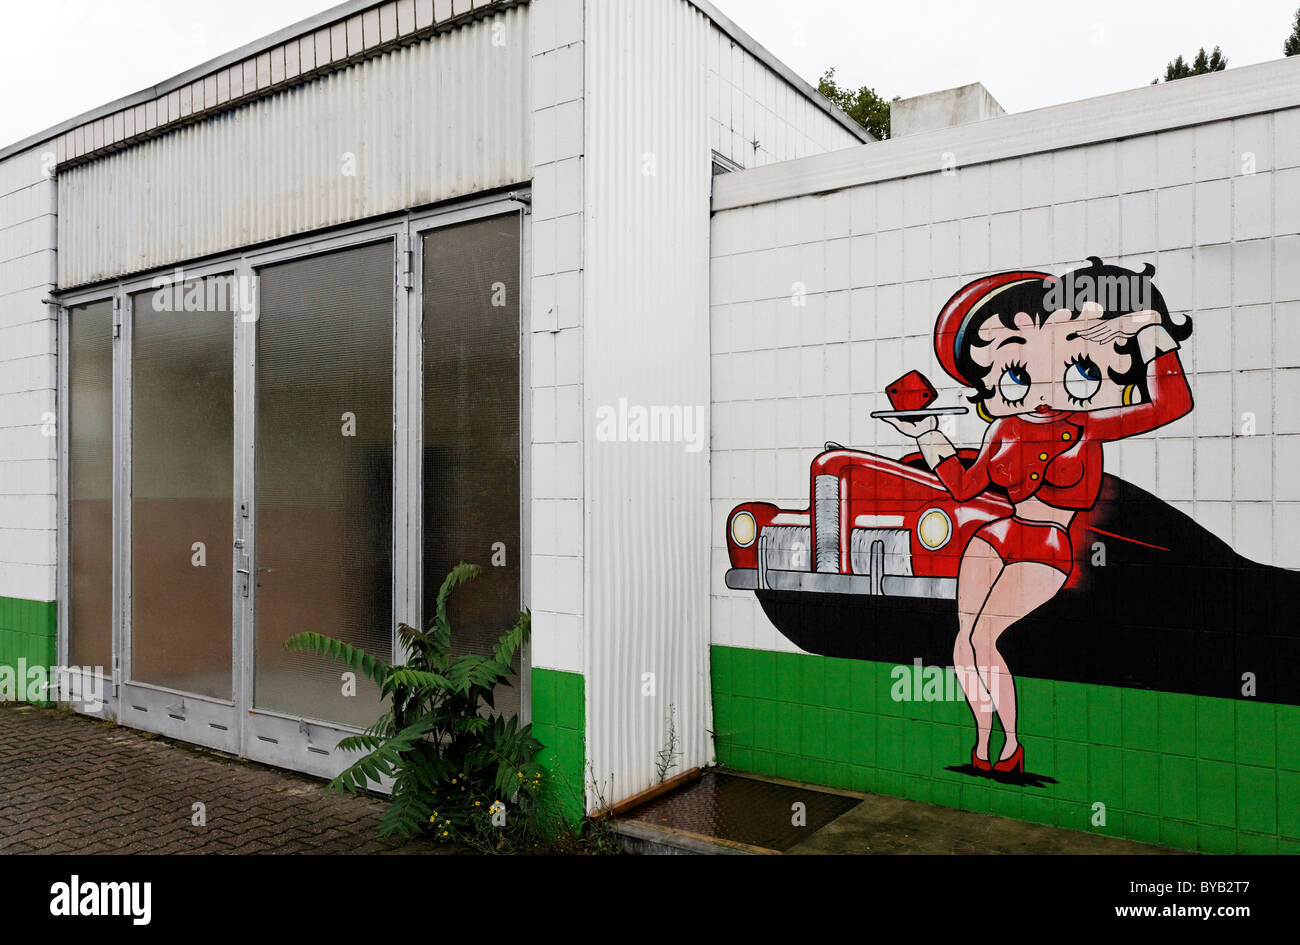 Abandoned car repair shop with a drive-in restaurant, advertising character painted on the wall, Krefeld, North Rhine-Westphalia Stock Photo